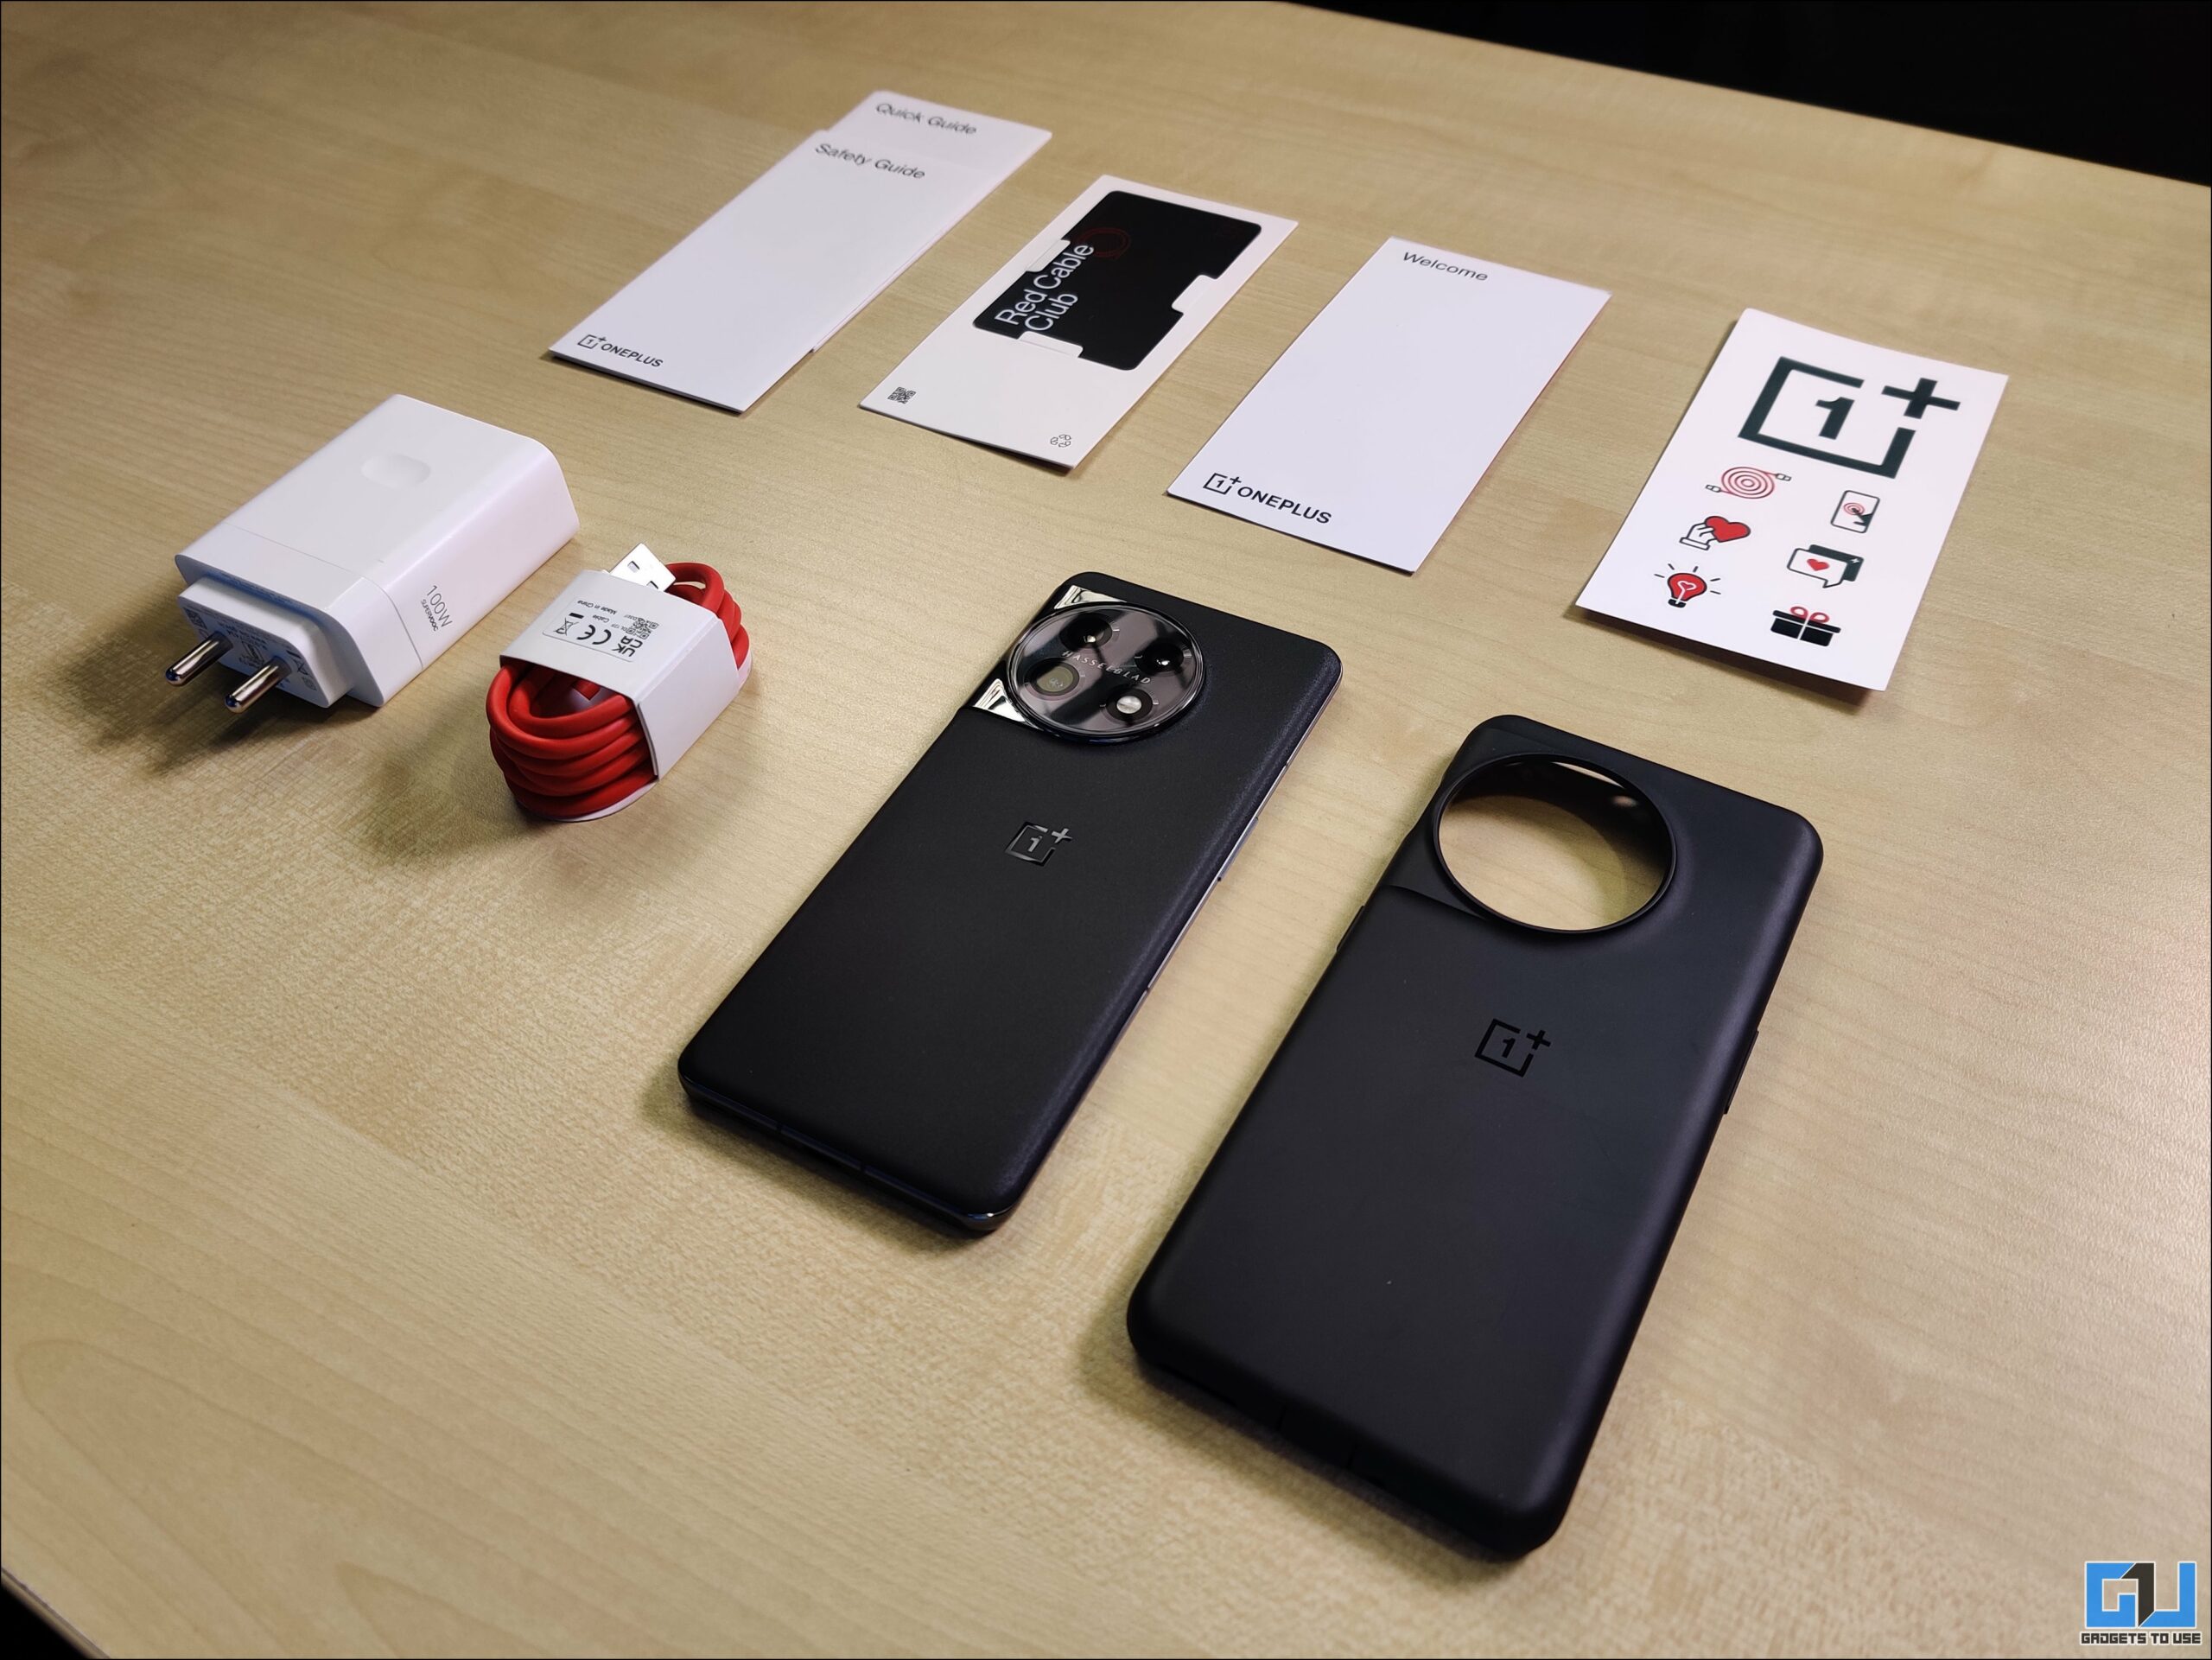 OnePlus 11 5G review. This OnePlus 11 deal gets you an…, by mohit sharma